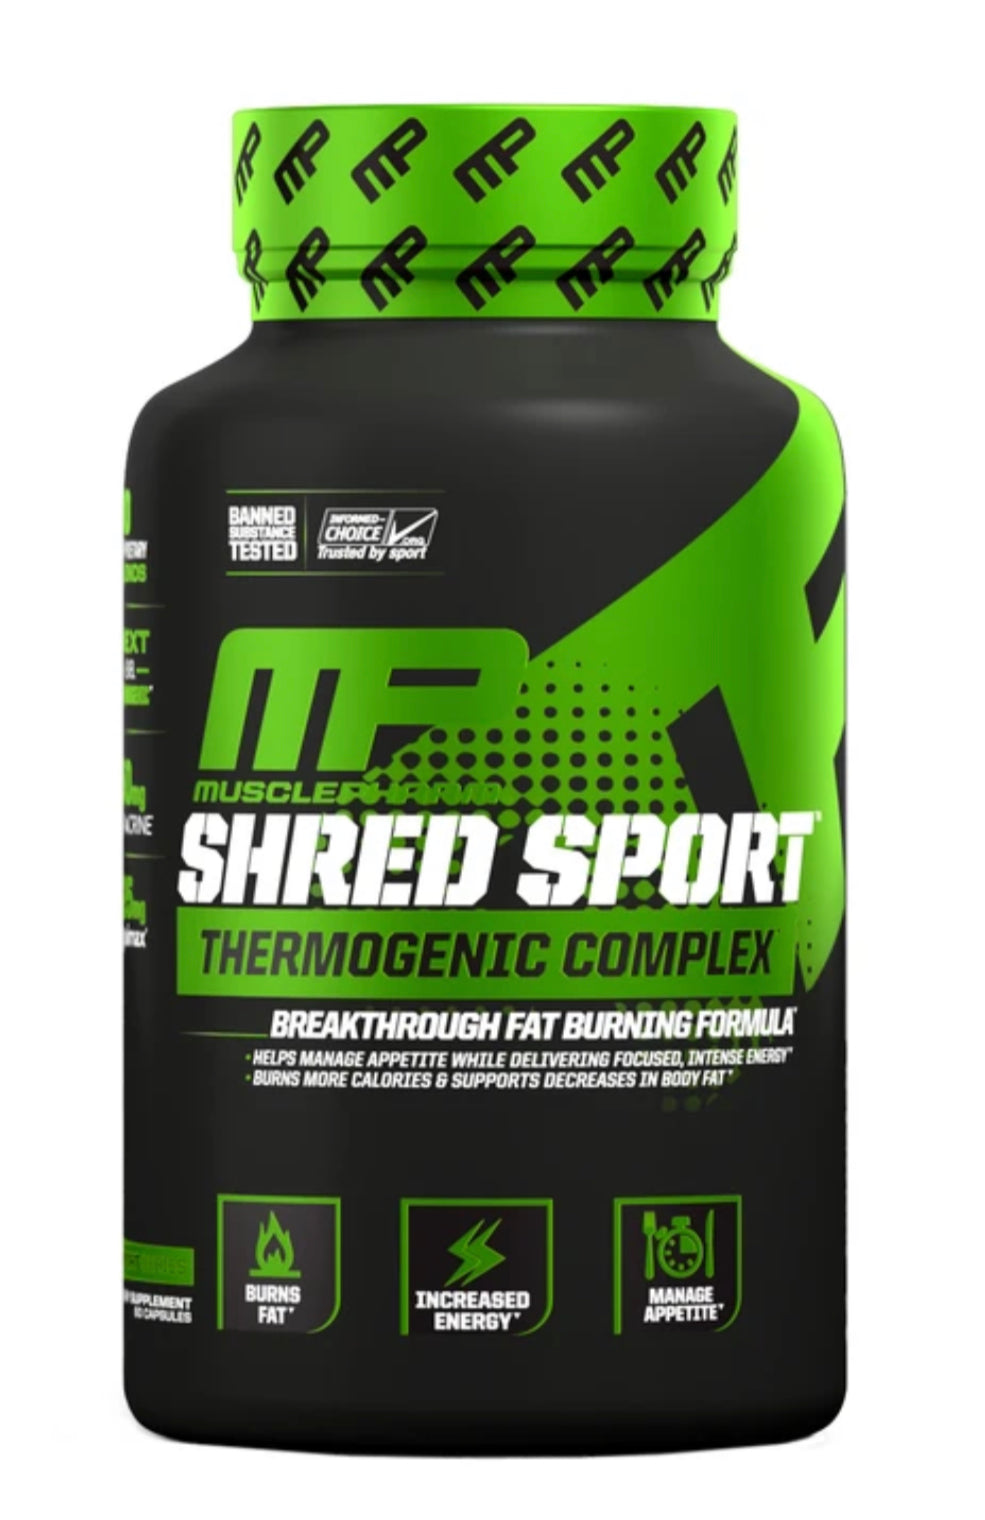 MusclePharm Shred Sport Thermogenic Complex Capsules 60